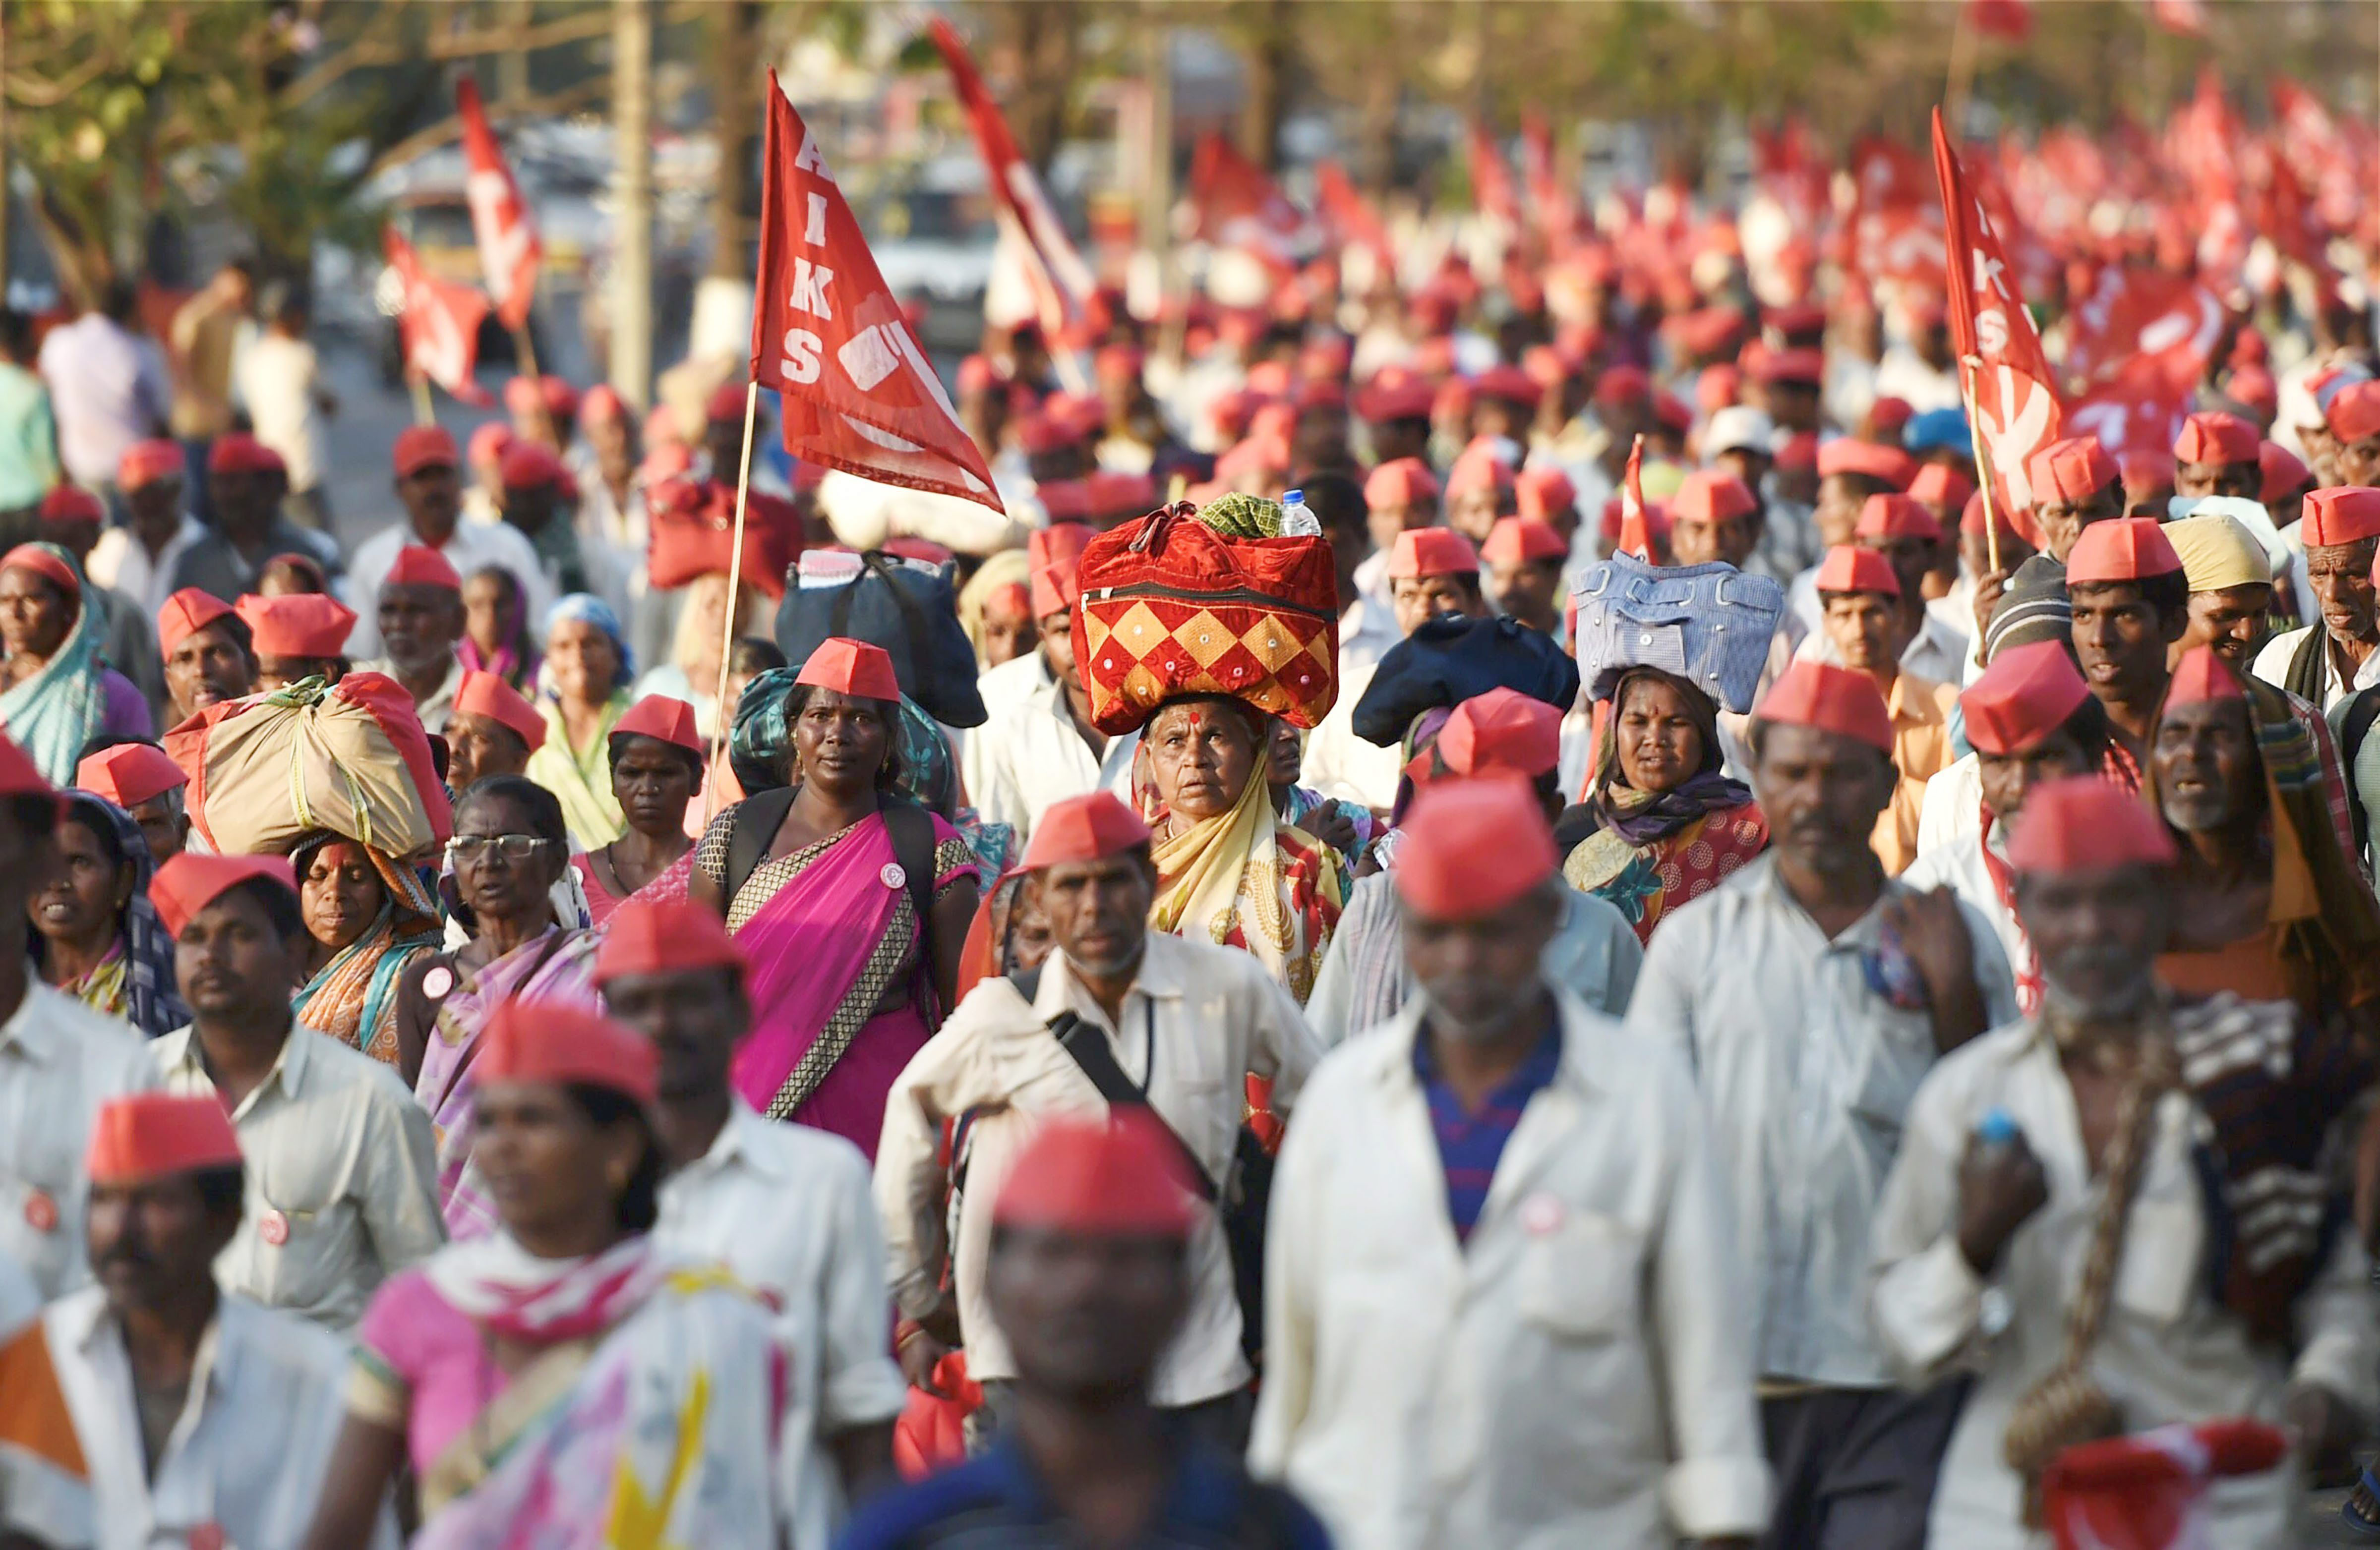 Kisan Long March: Here's why the farmers are protesting4800 x 3127